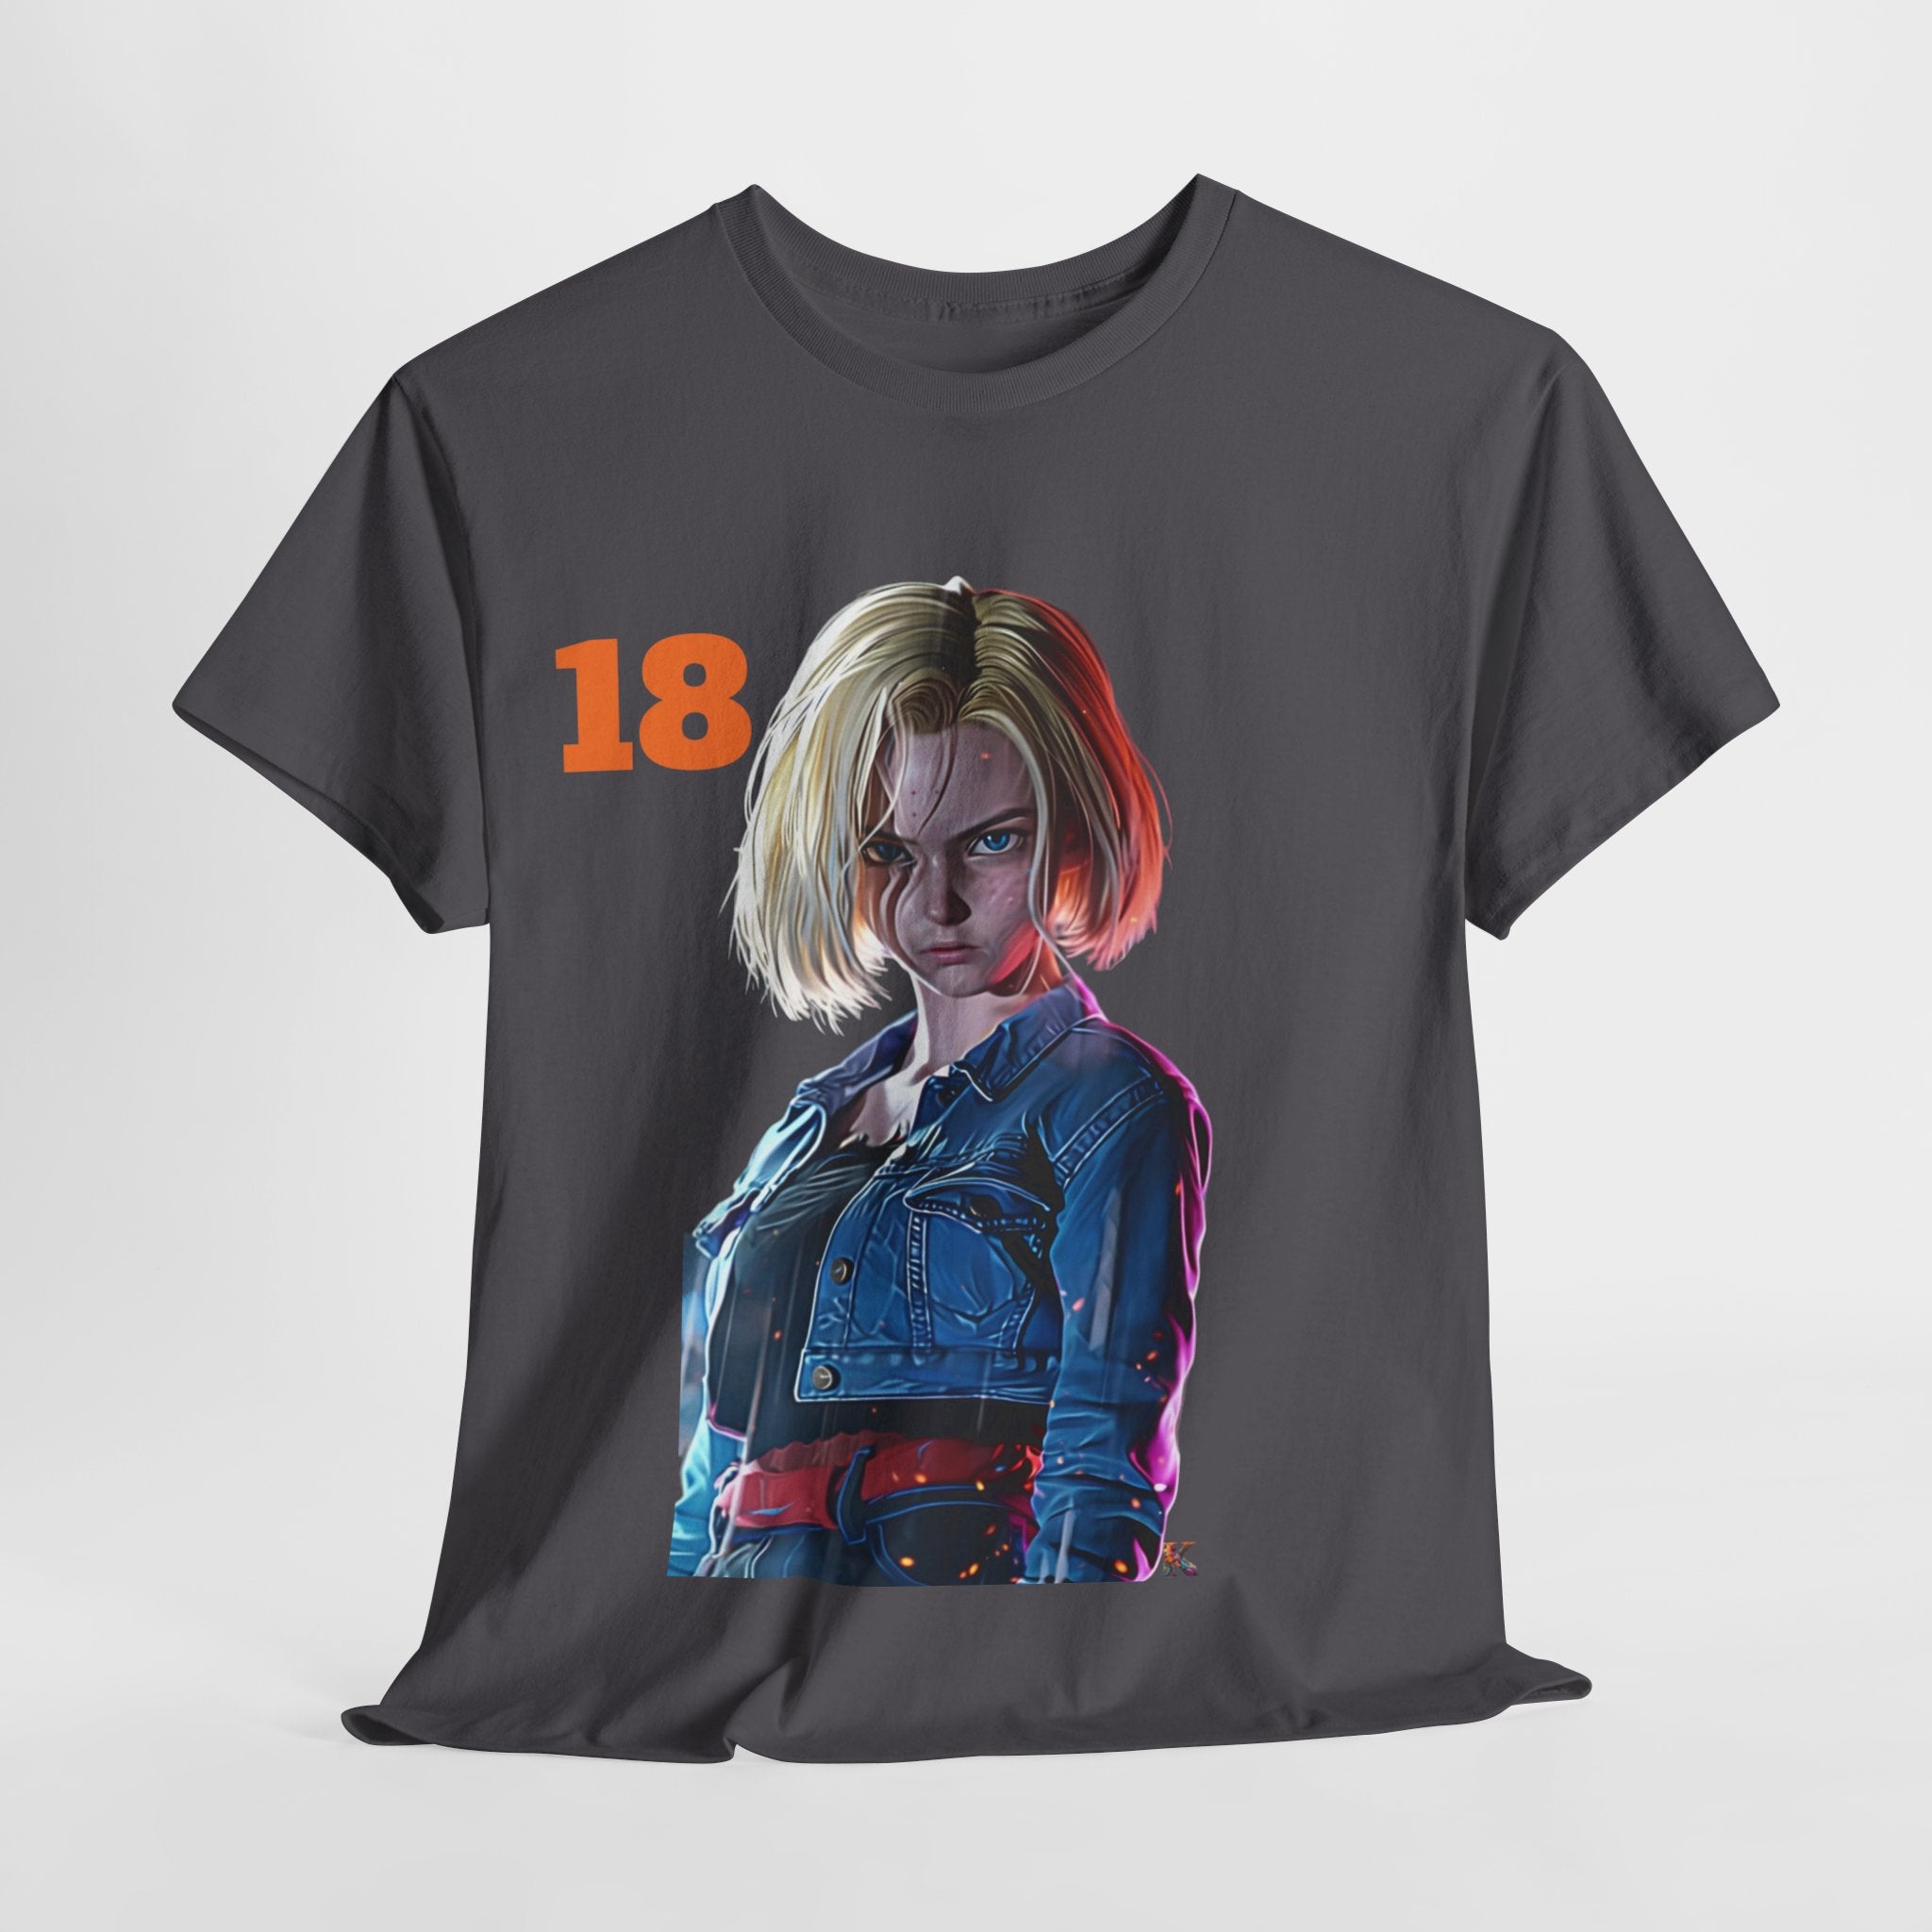 The image displays a stylish unisex heavy cotton tee, featuring a vibrant print inspired by Android 18. The tee is shown in a classic cut with a robust texture, highlighting its quality and the eye-catching design of the character. The neutral background emphasizes the tee's adaptability and fashion-forward aesthetic.